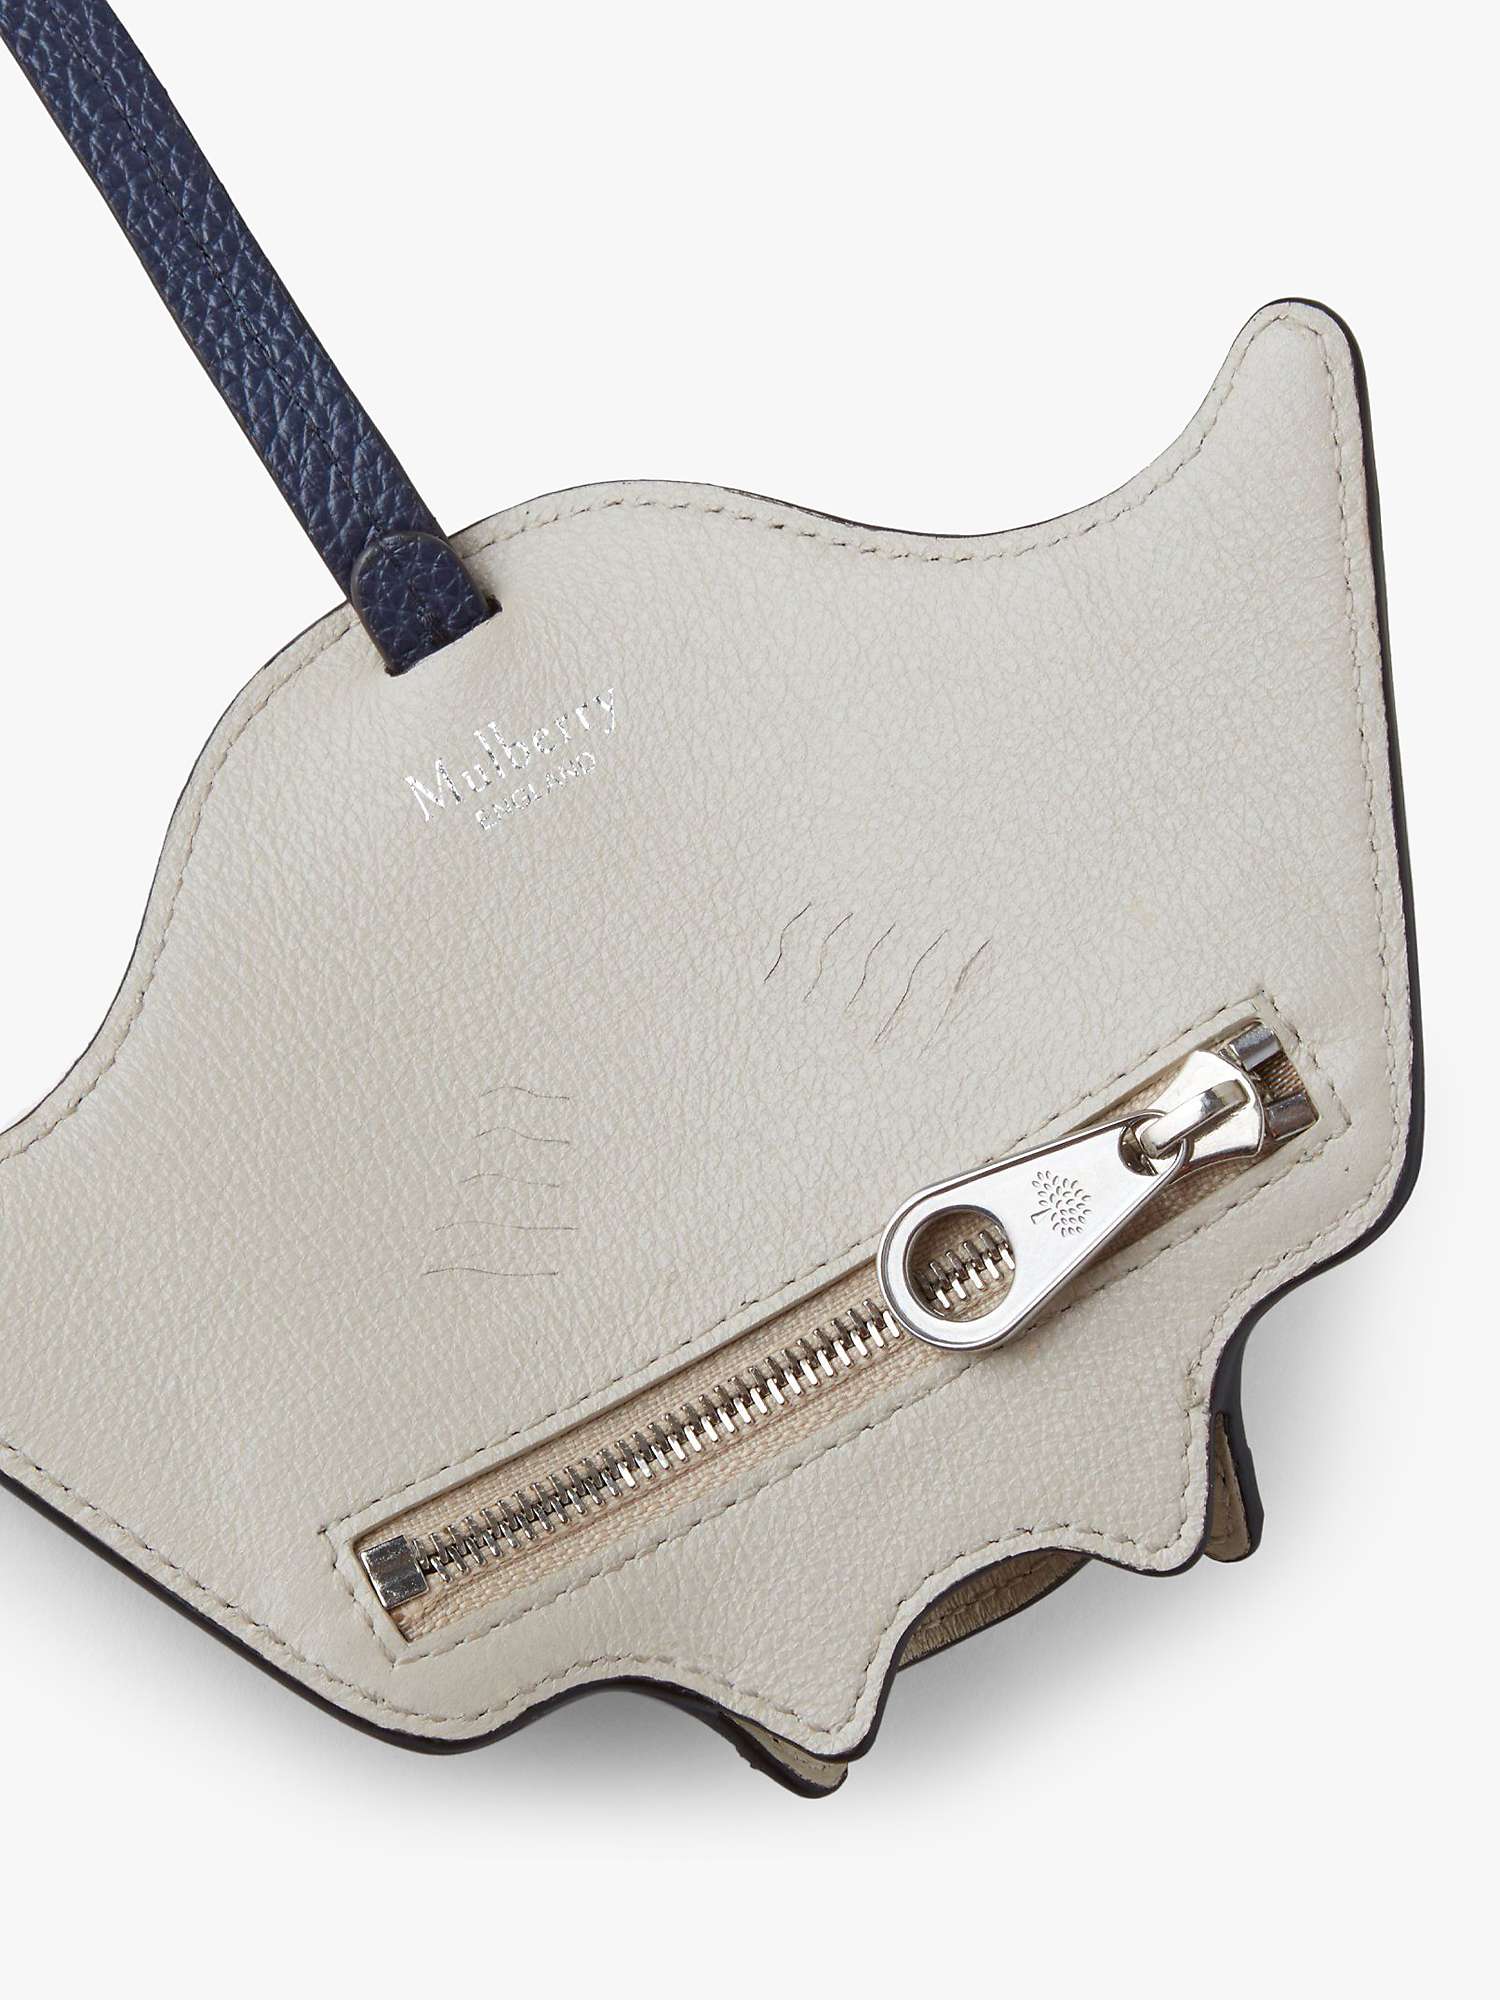 Buy Mulberry Manta Ray Leather Keyring Online at johnlewis.com